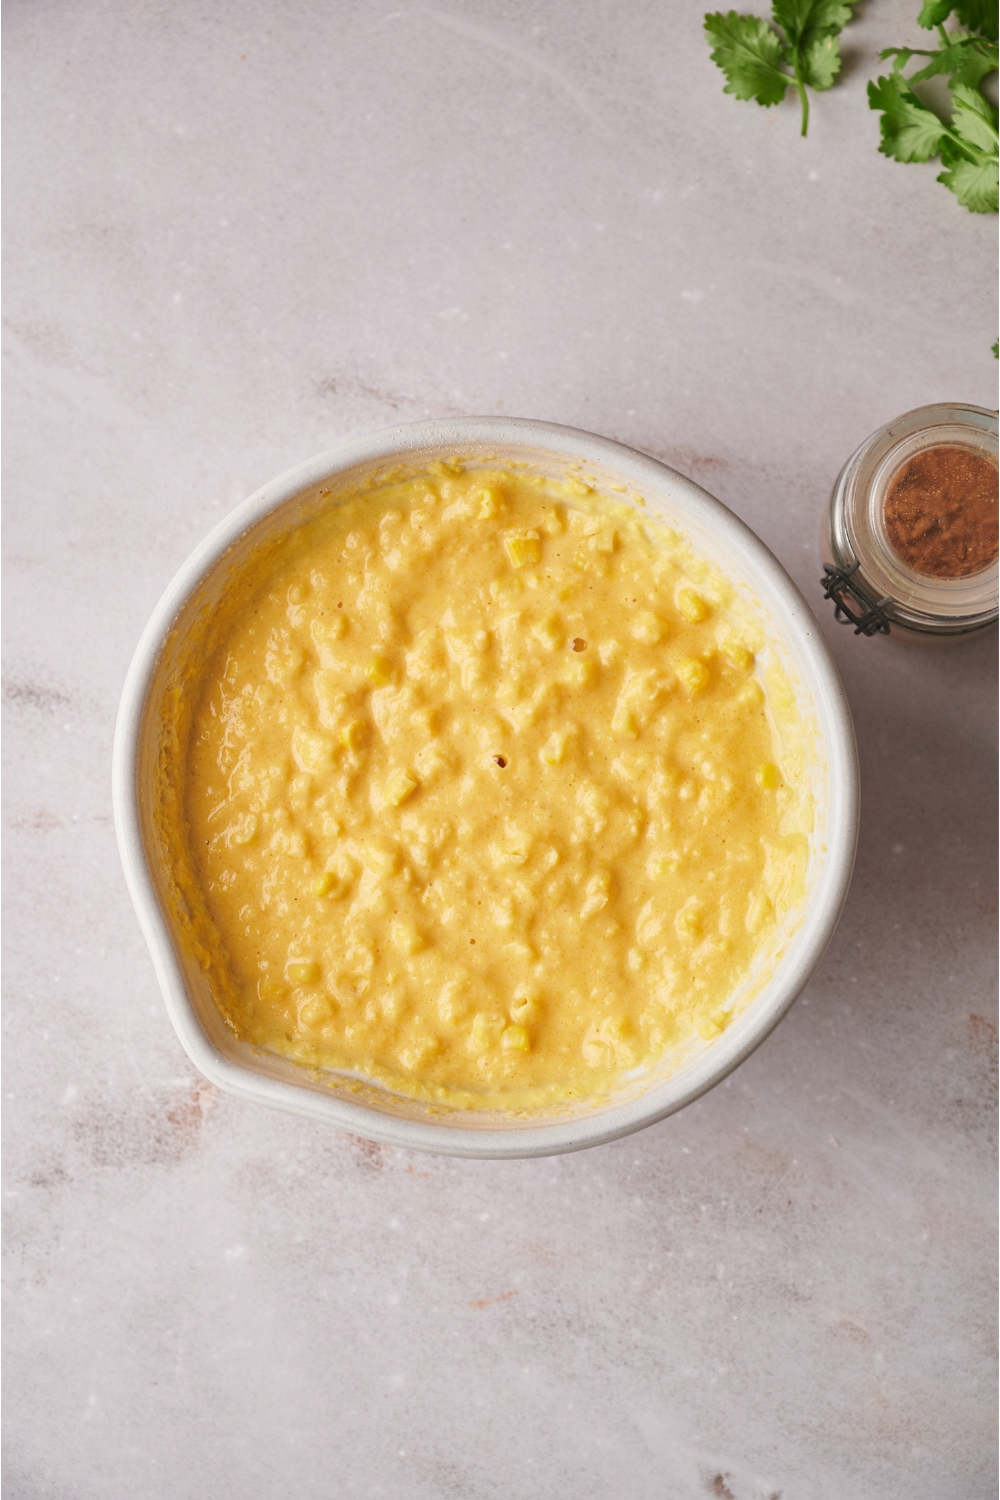 Cornbread batter in a white bowl on a grey counter.